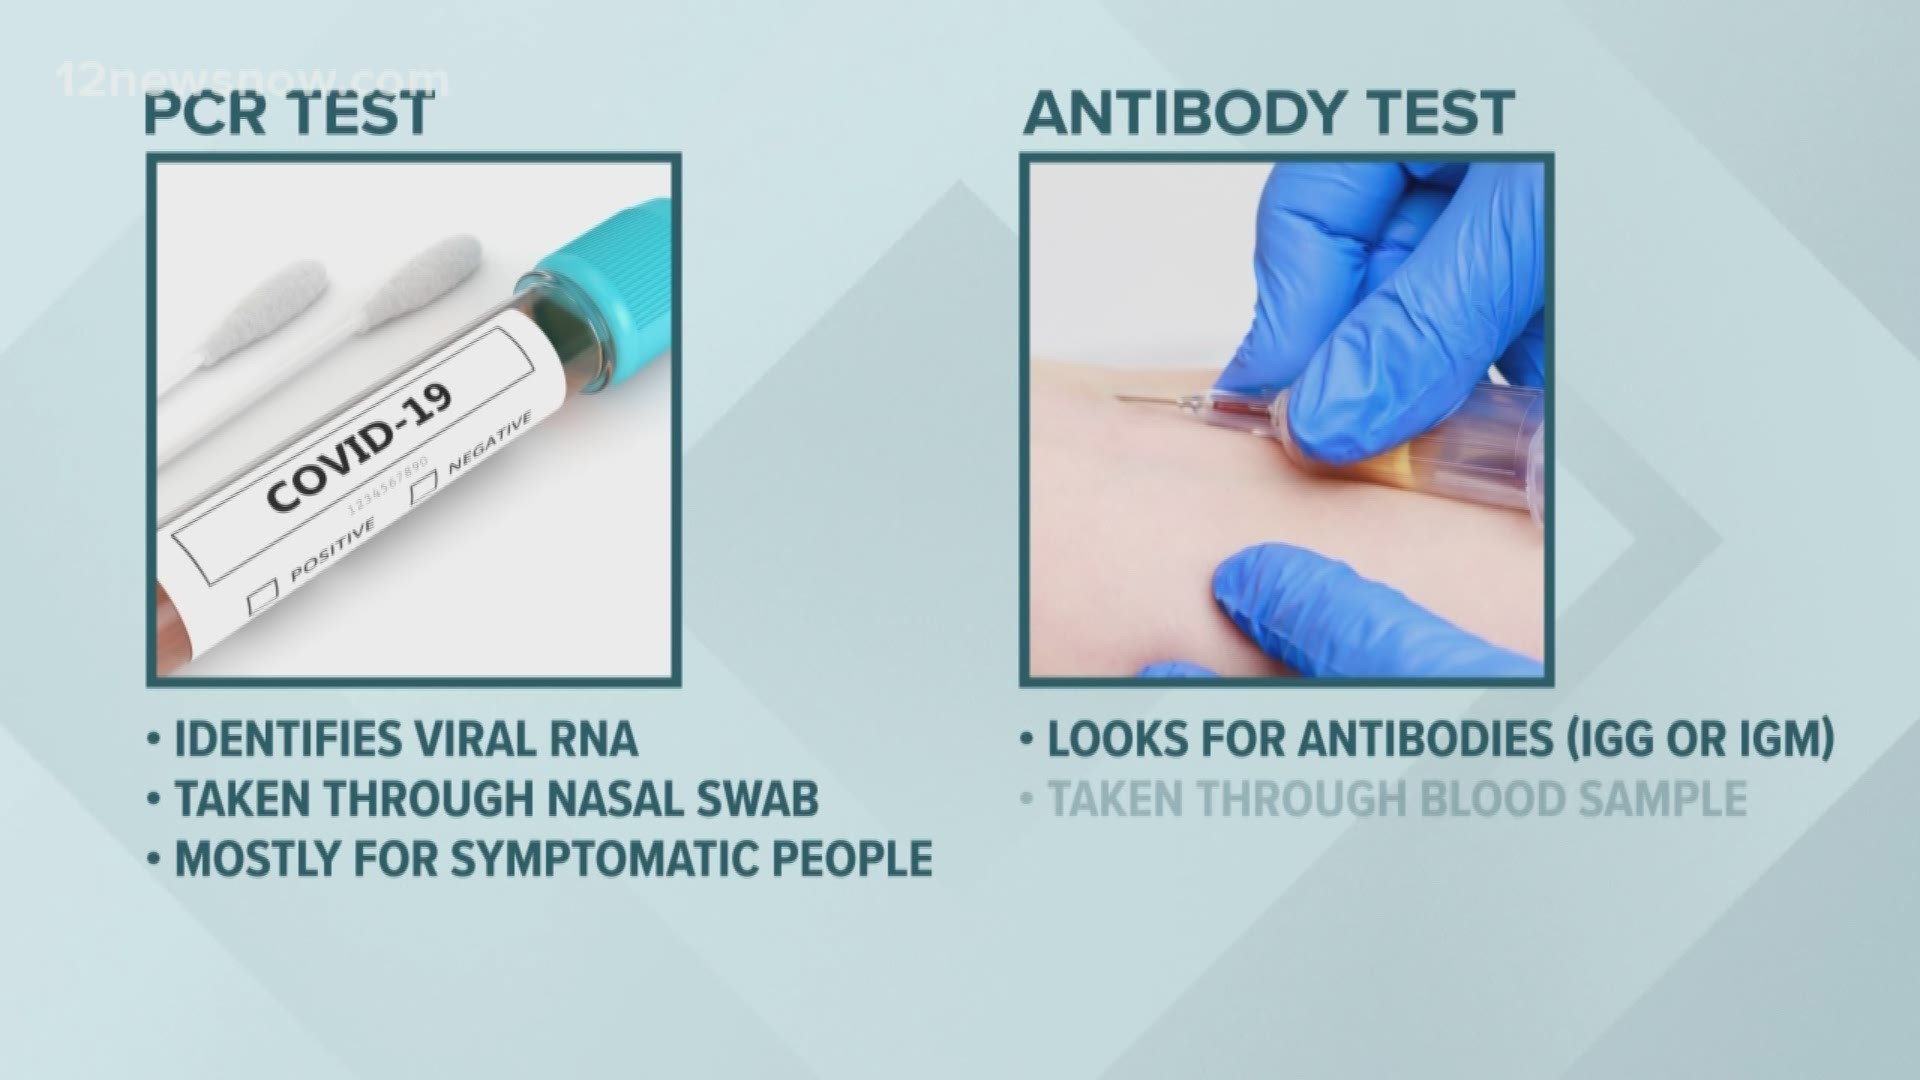 There is a difference between antibody testing and PCR testing